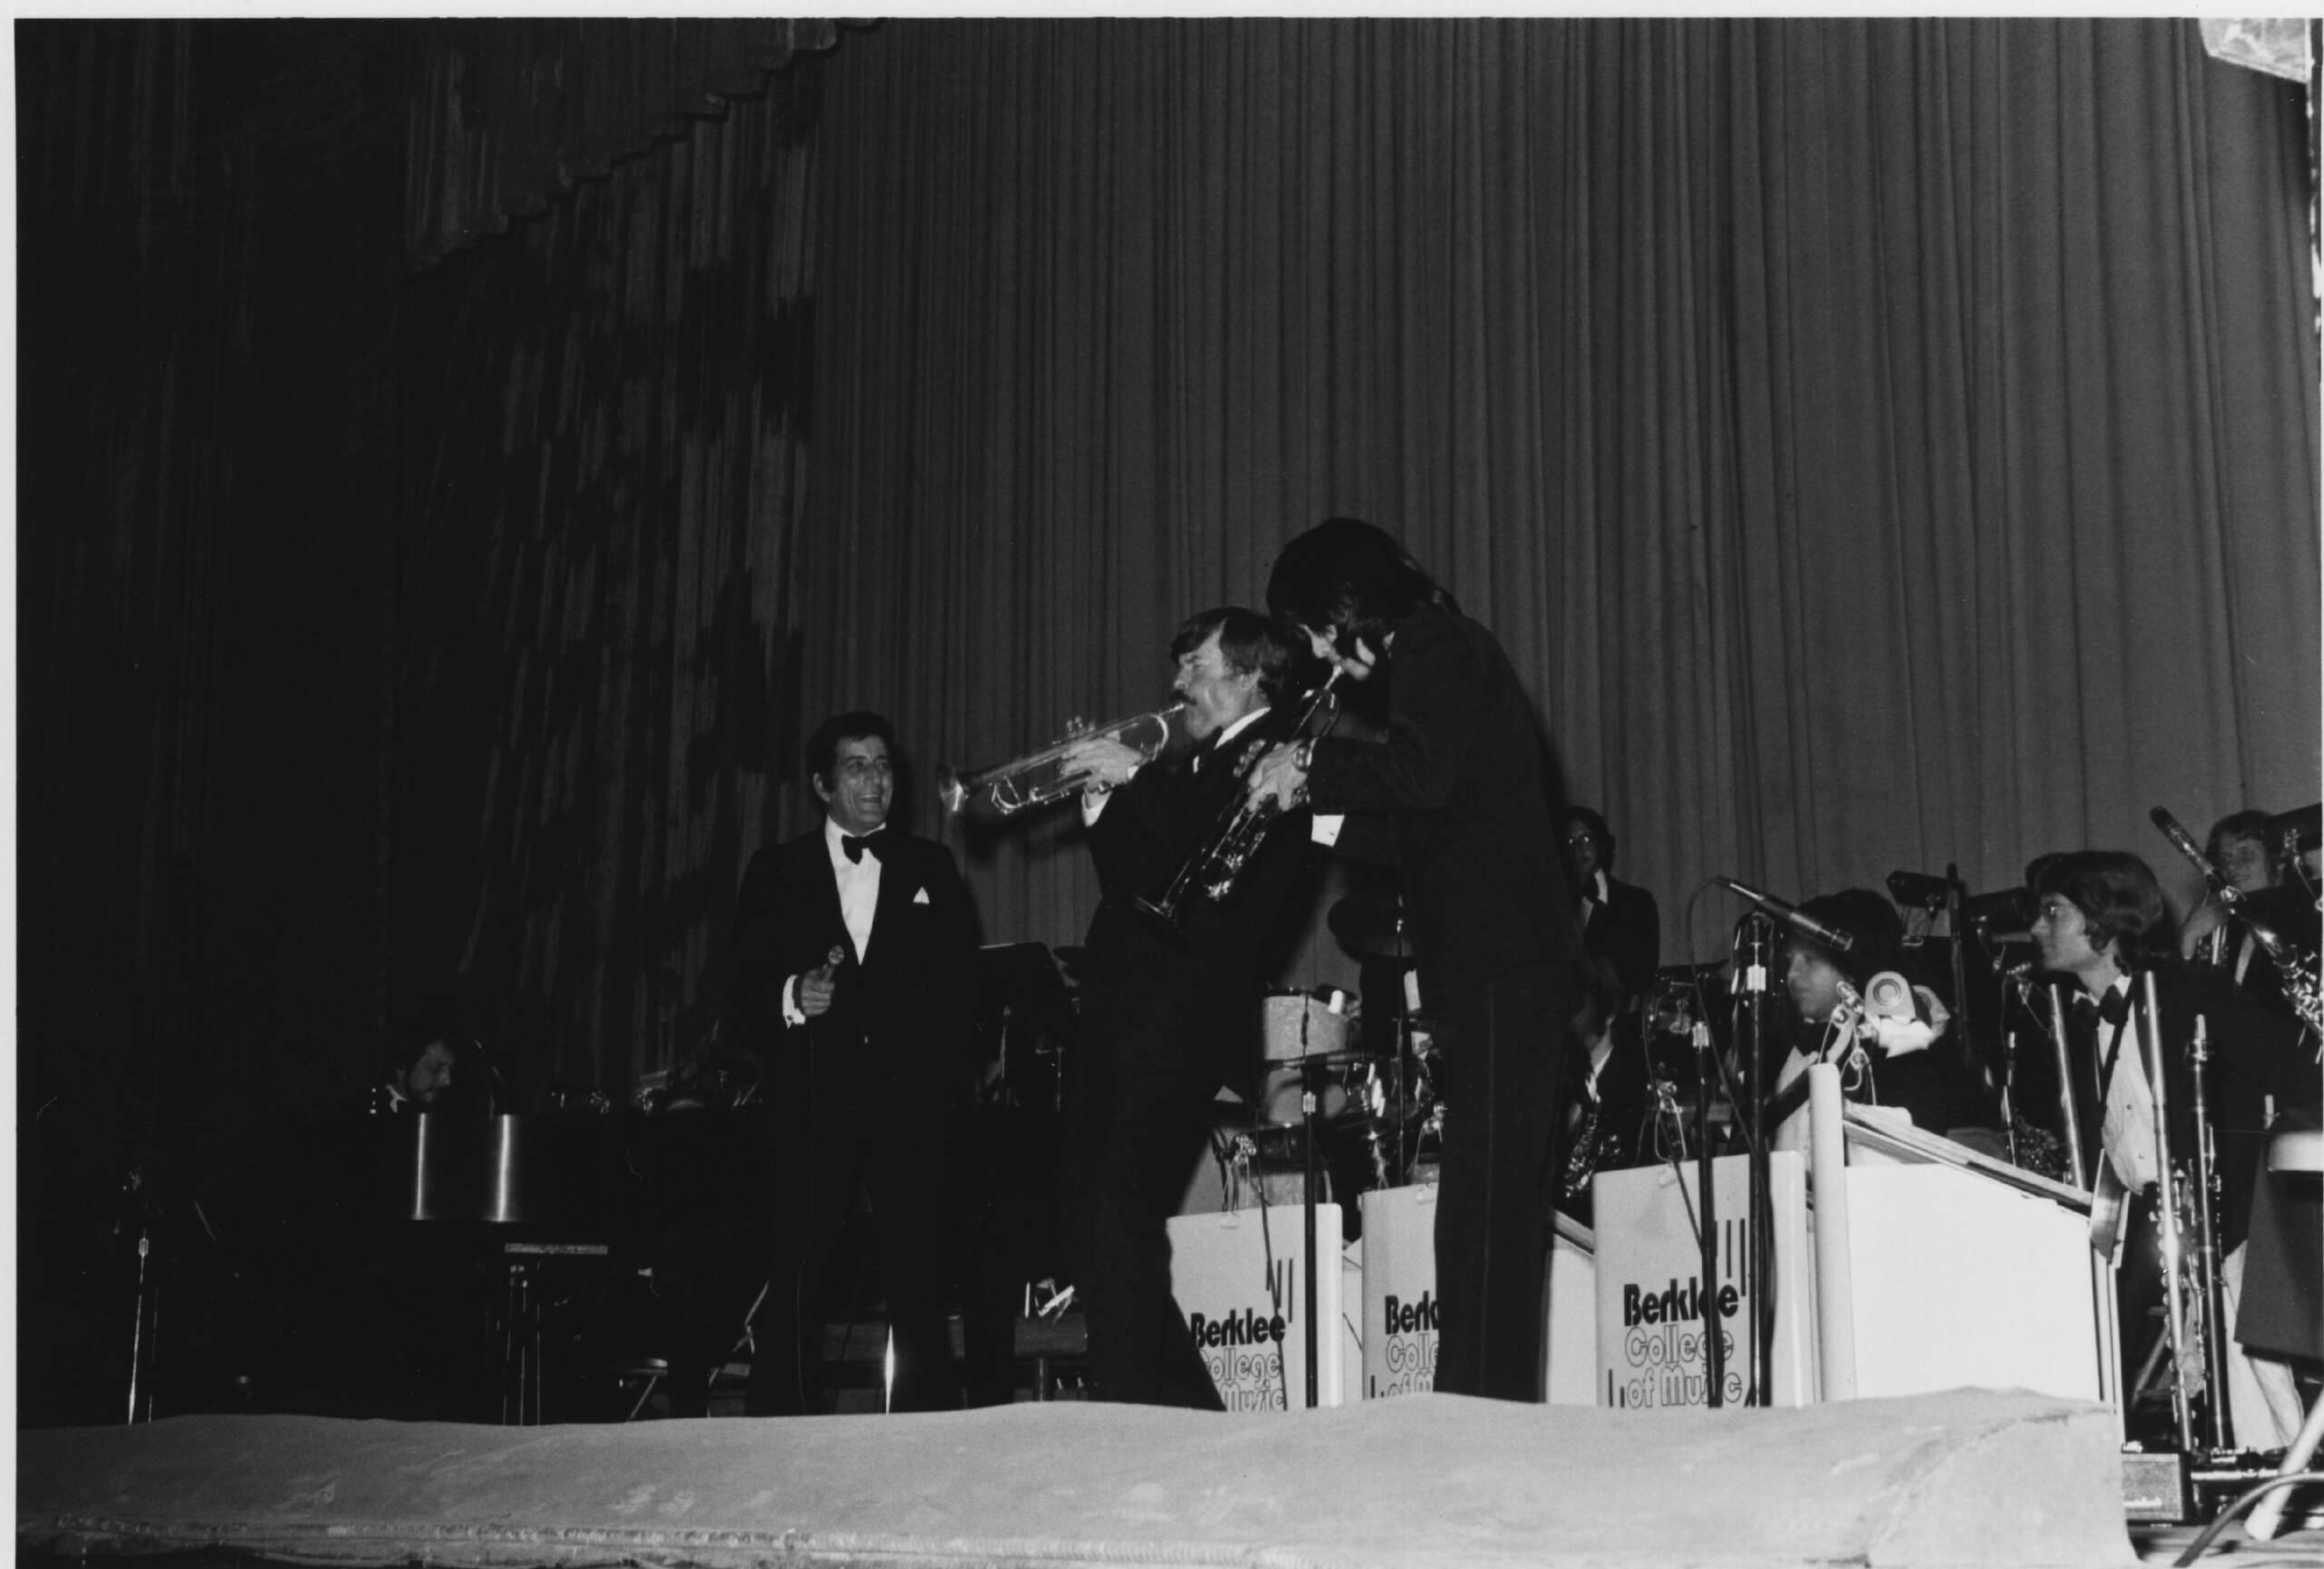 Tony Bennett performs in 1973 with the Berklee Jazz Orchestra. (Courtesy Berklee Archives)